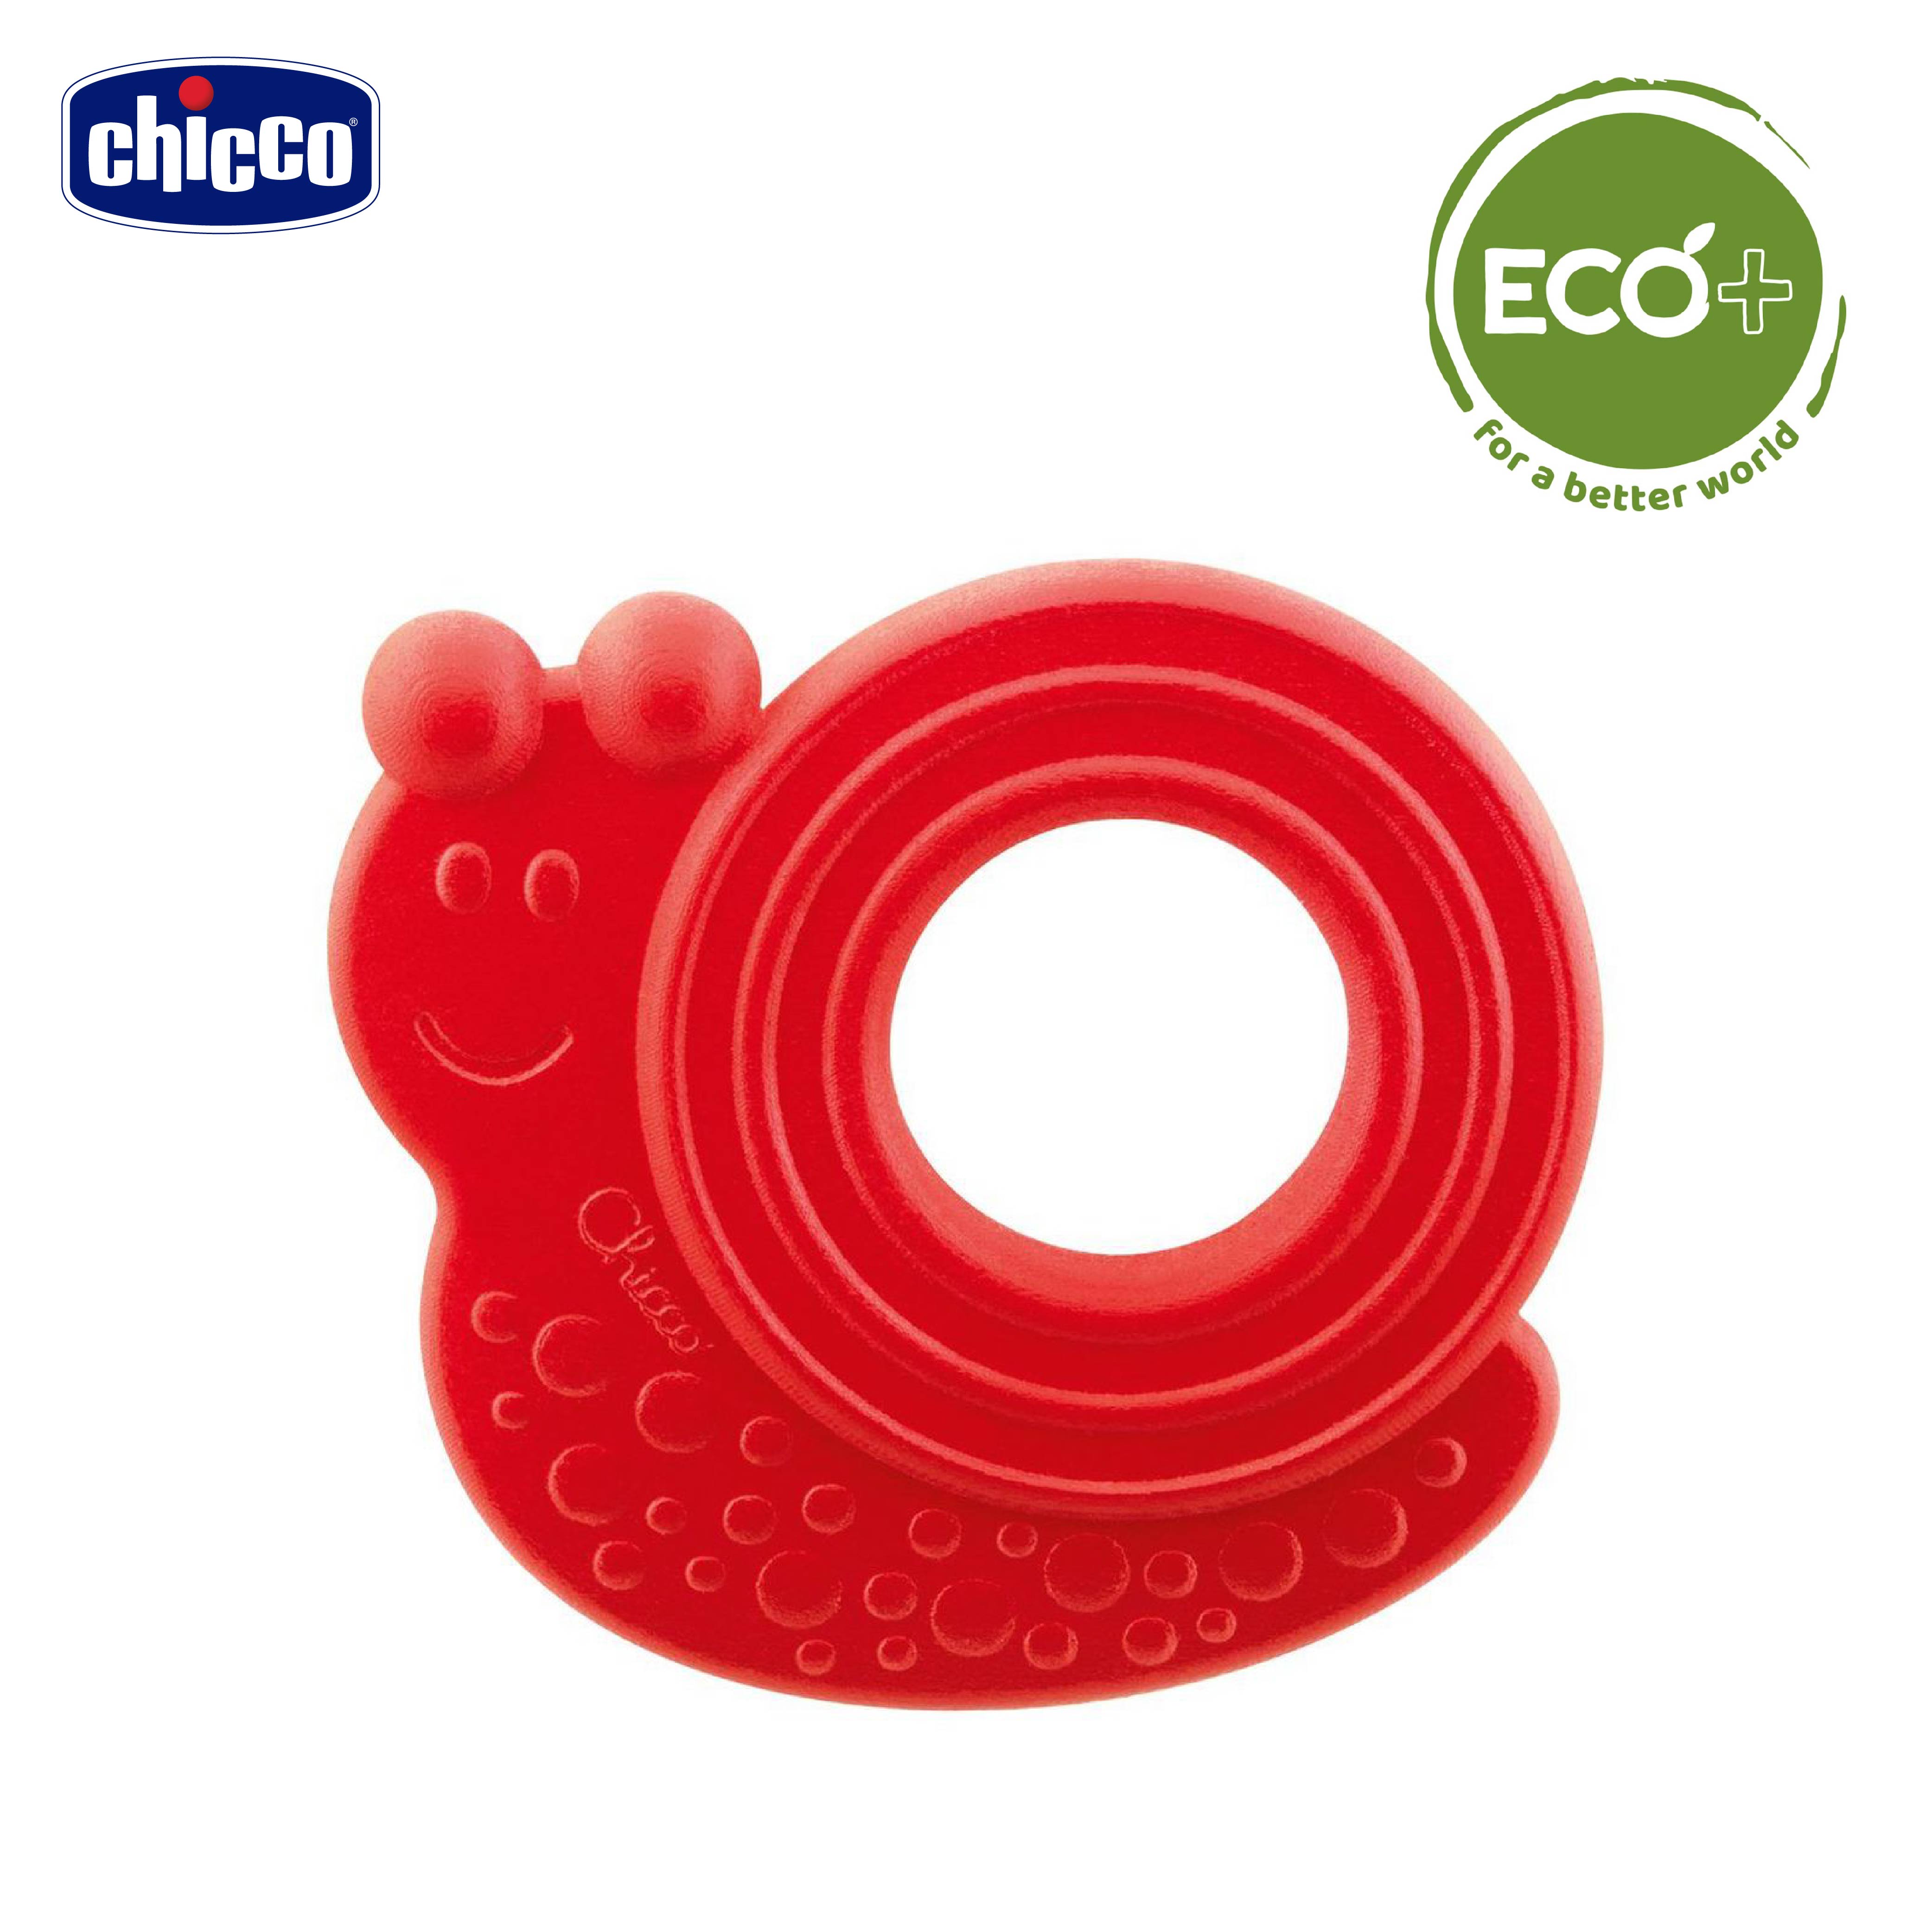 Chicco Toy Teethers Eco+